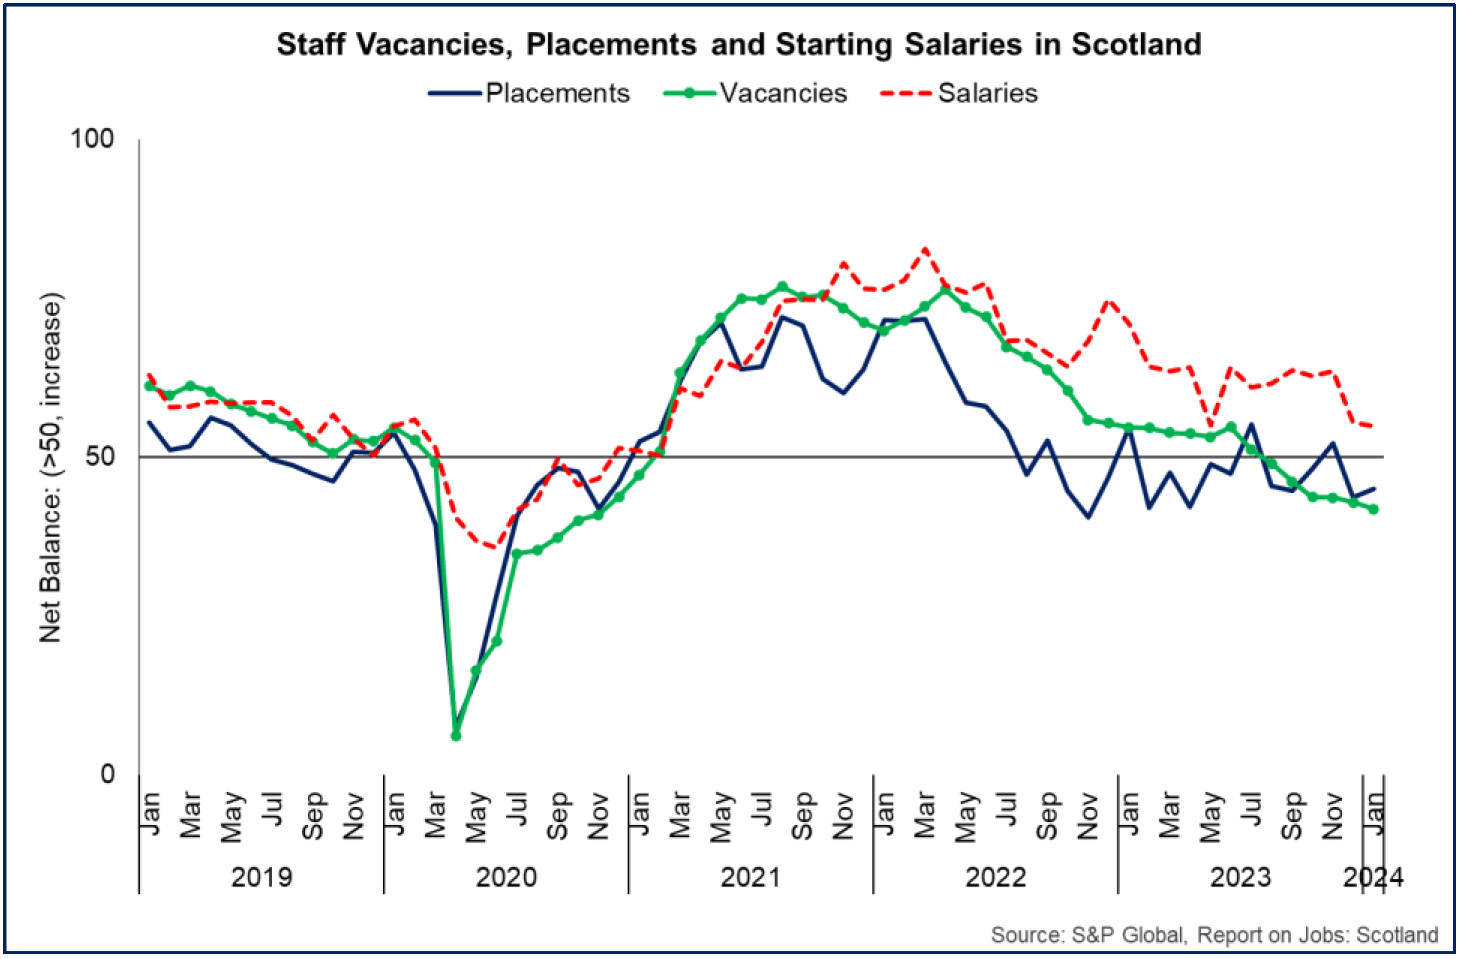 latest data showing a fall in permanent staff placements and vacancies at the start of 2024 while starting salaries growth moderated